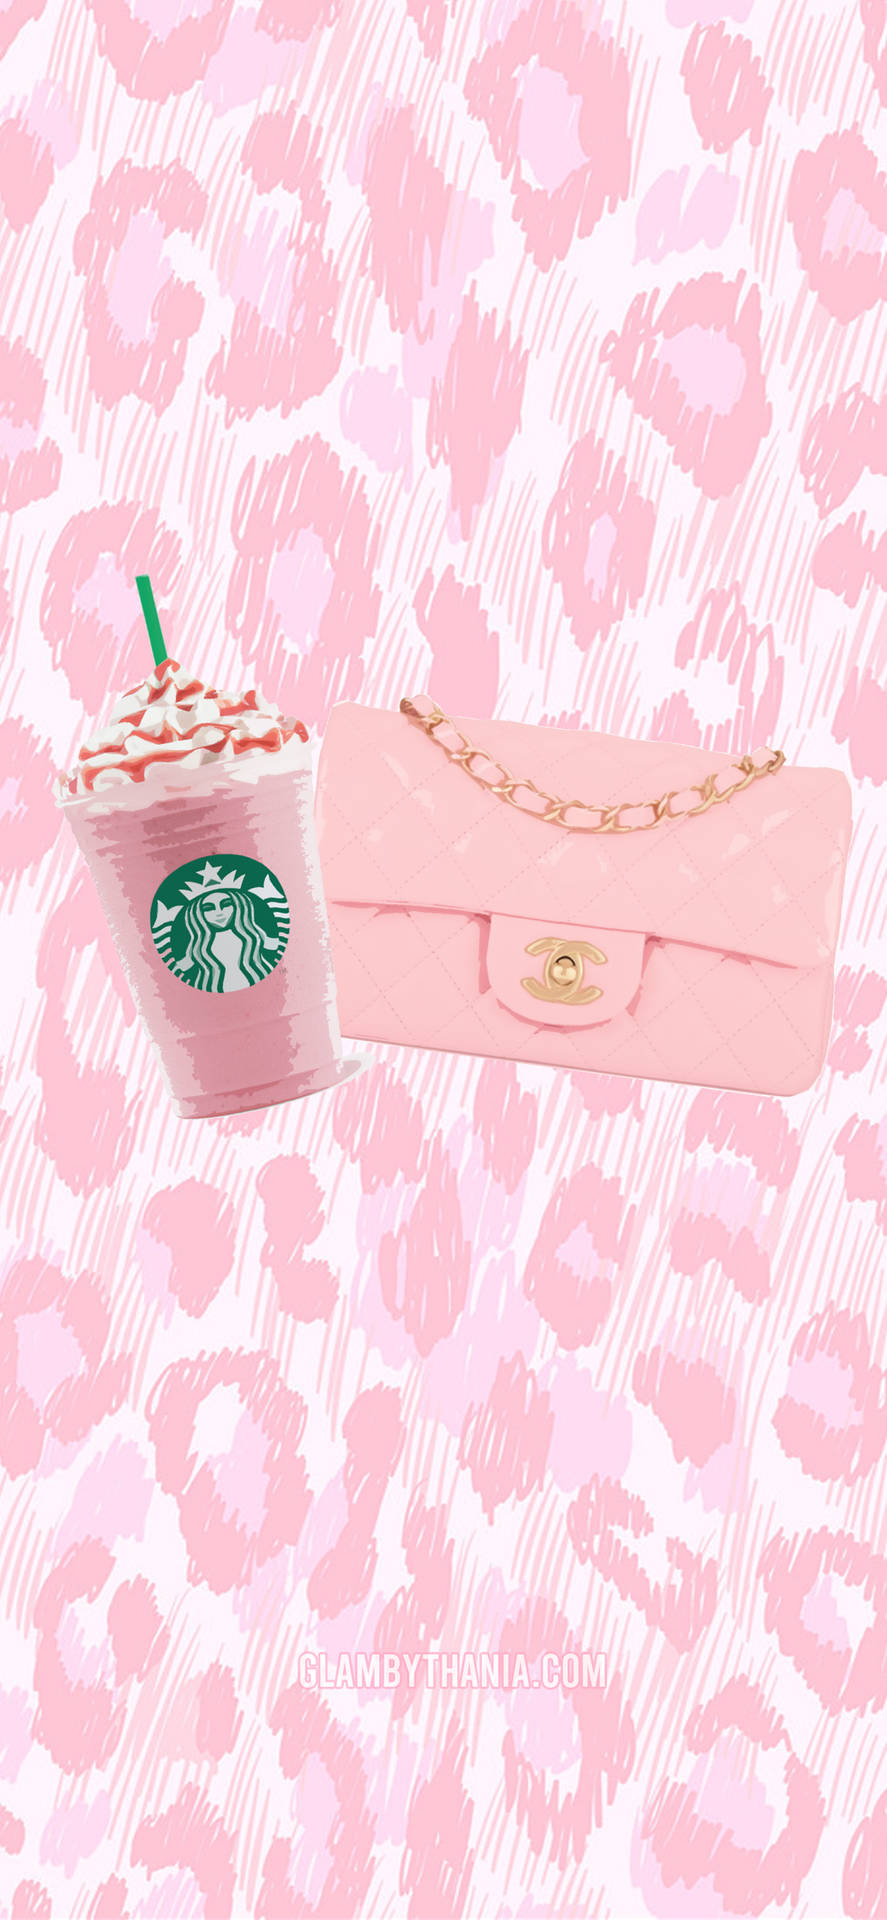 Pink Purse And Starbucks Girly Iphone Background